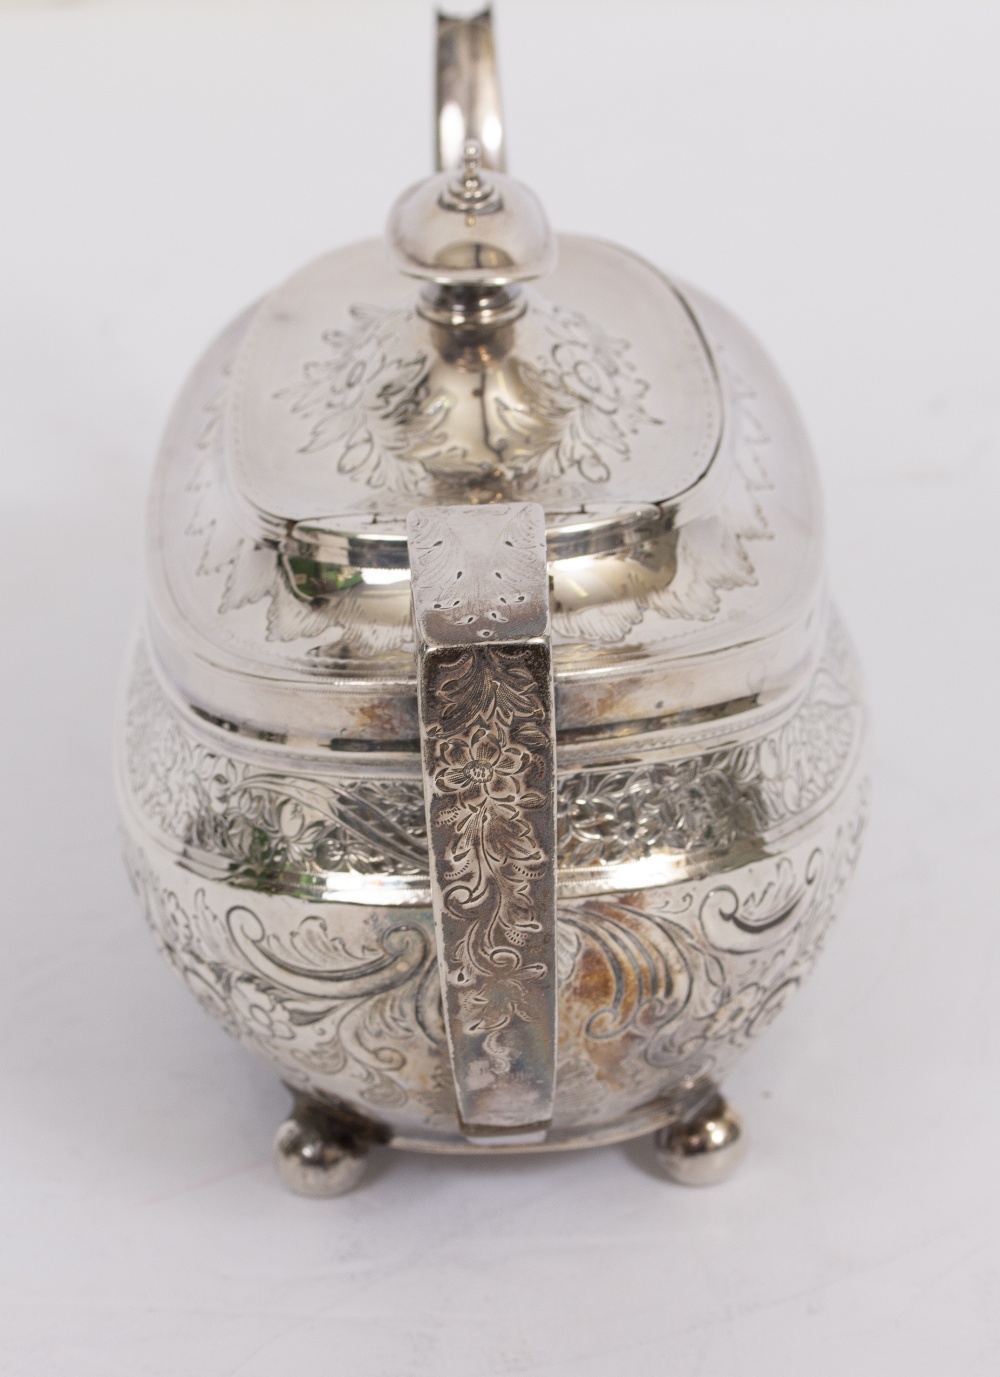 A GEORGE III SILVER TEAPOT by Thomas Wallis II, with silver knop and silver handle with insulators - Image 6 of 8